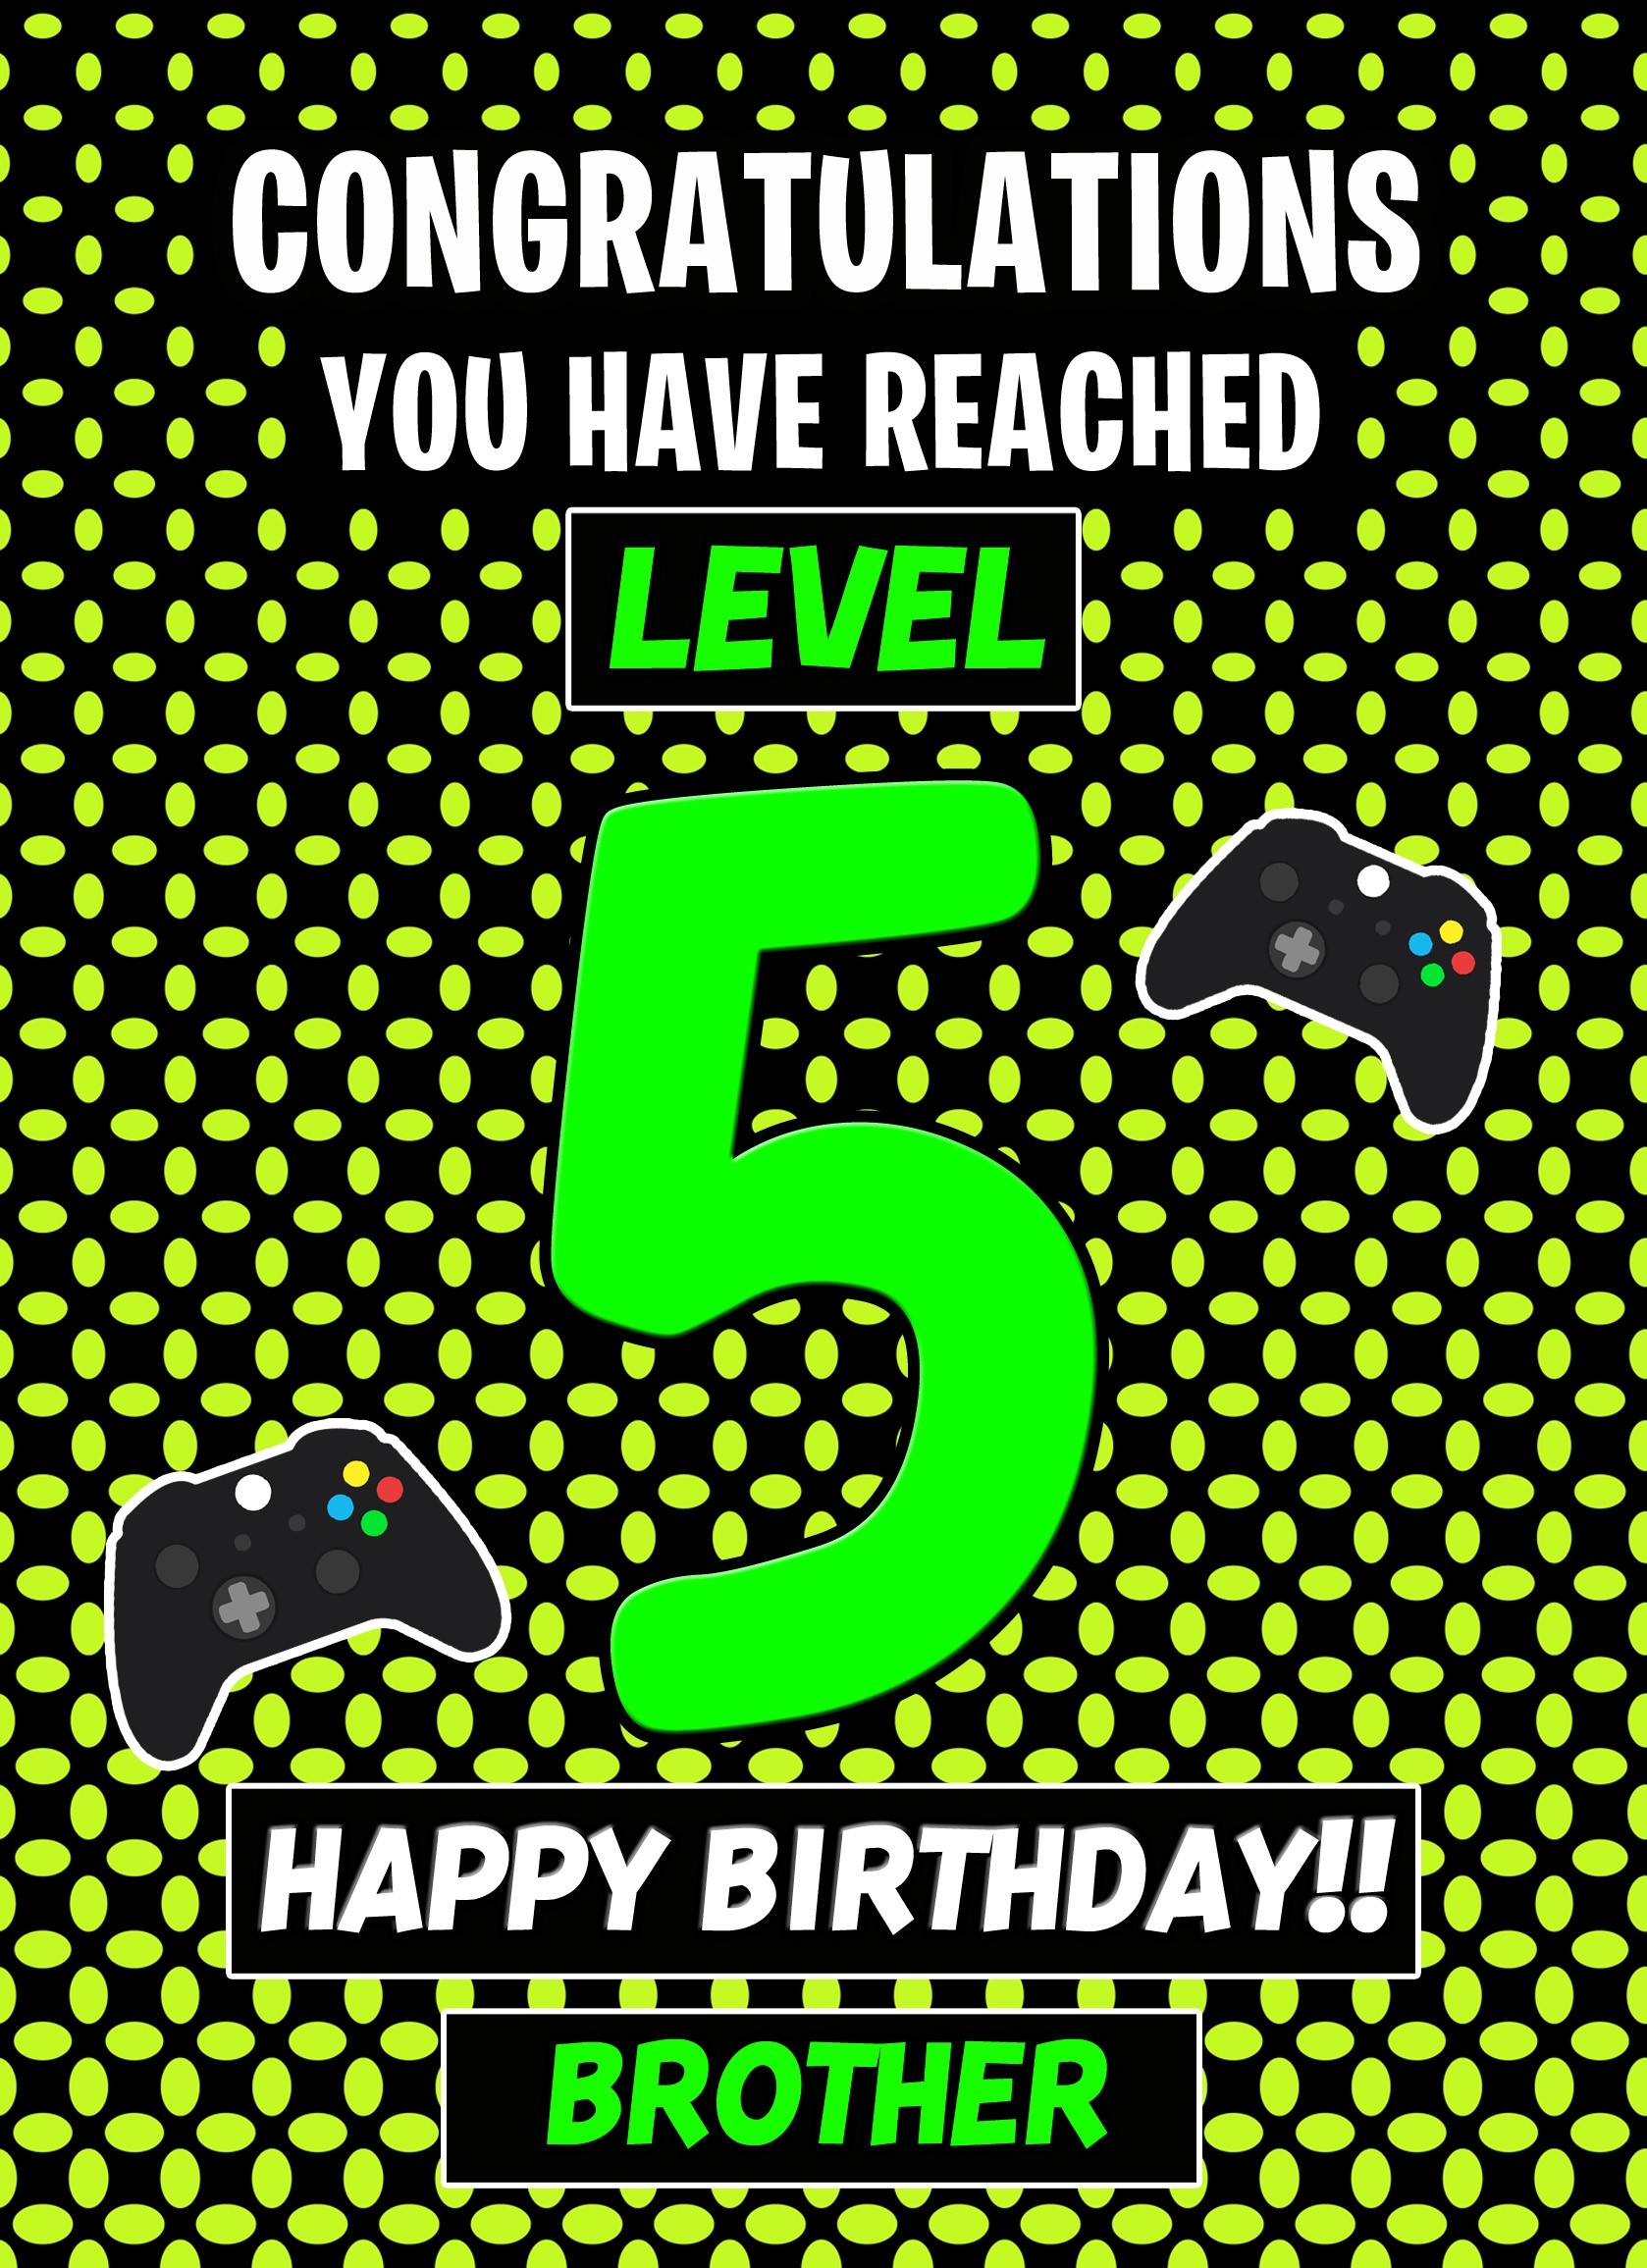 Brother 5th Birthday Card (Level Up Gamer)